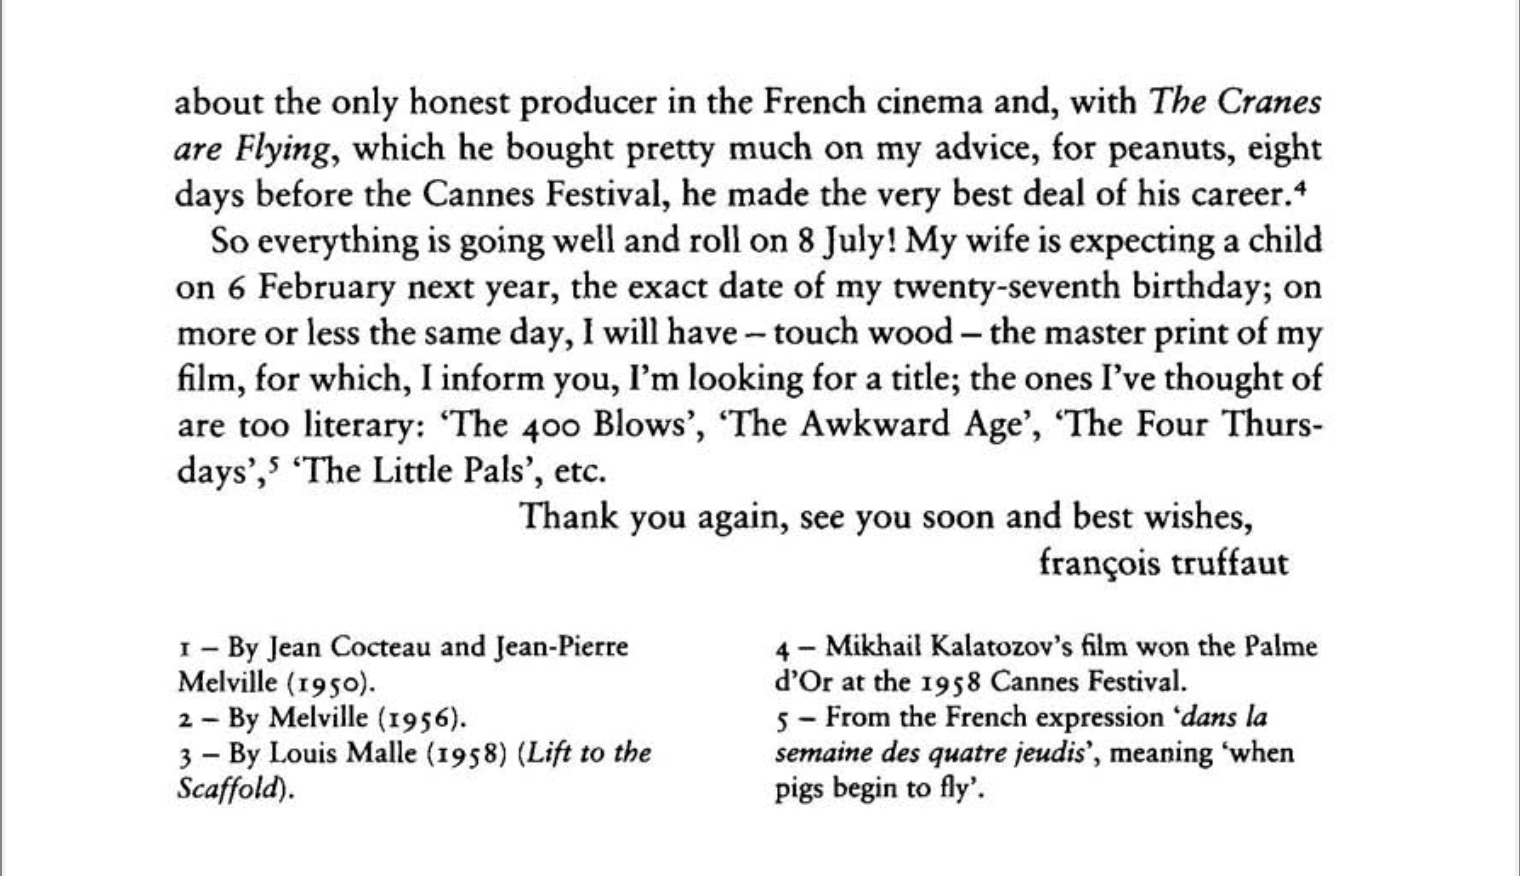 A letter by Truffaut to Marcel Moussy about the production of Les quatre cents coups, pt. 2